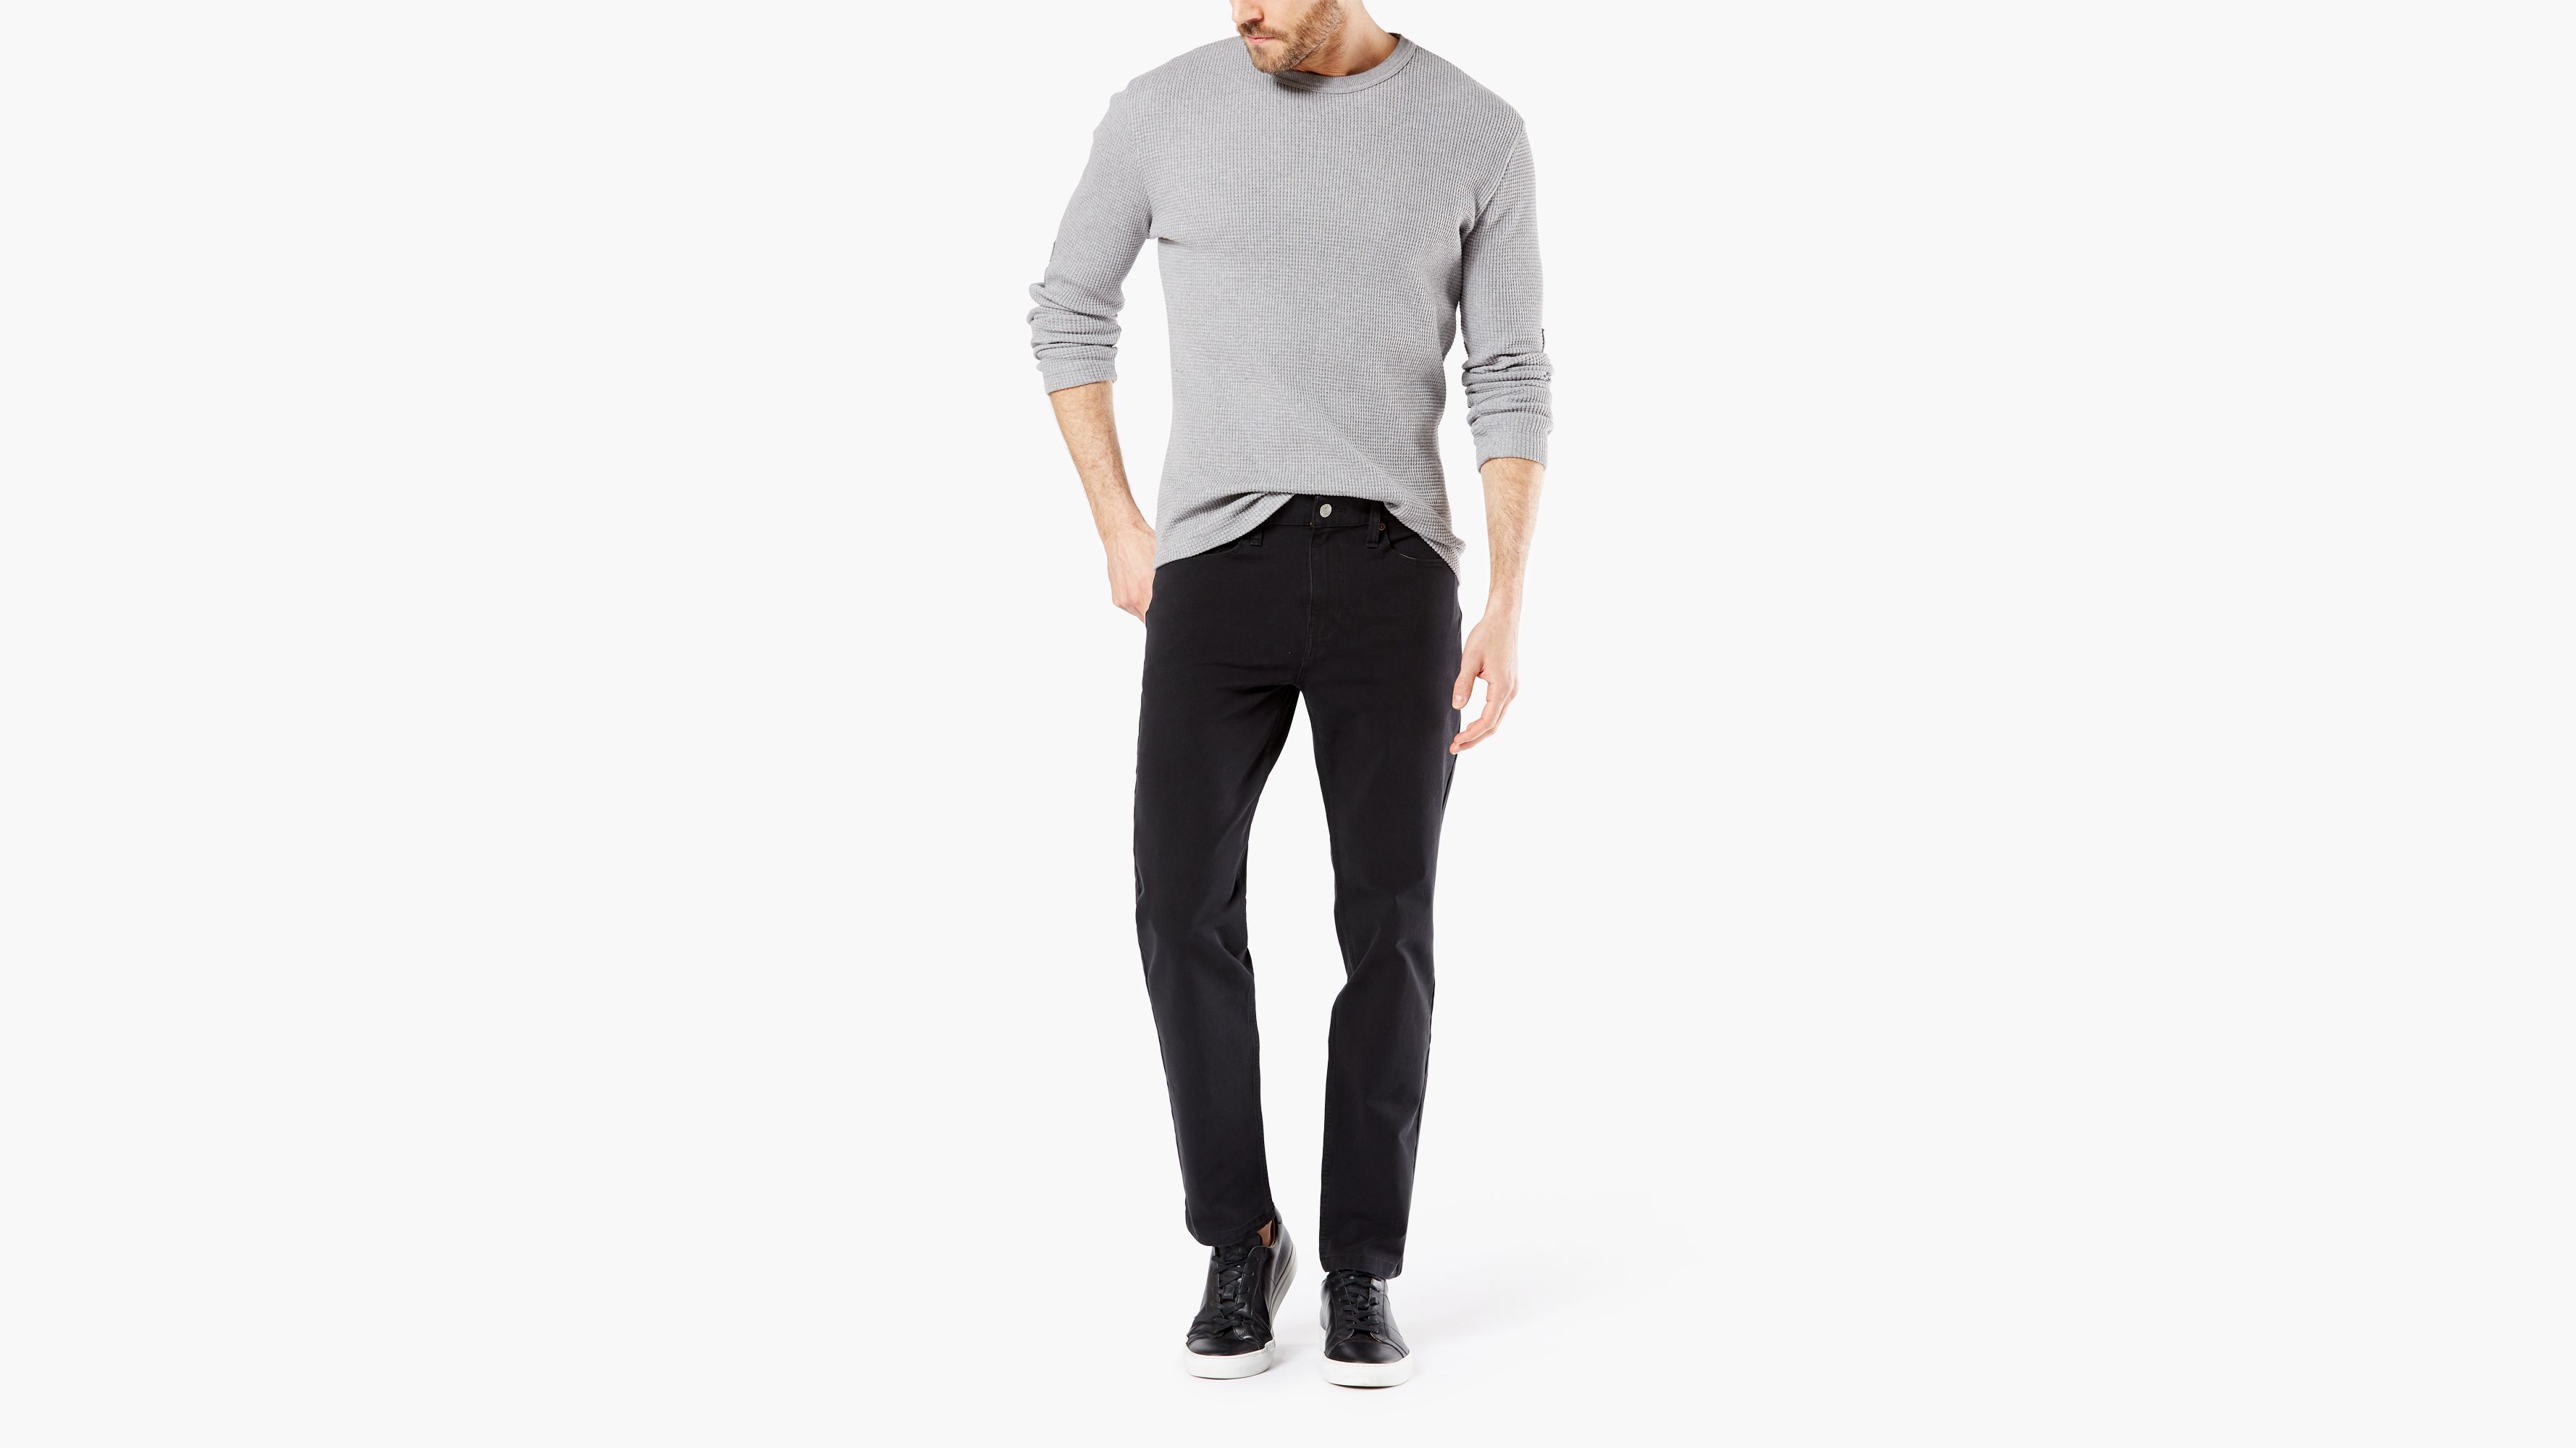 tapered cut pants